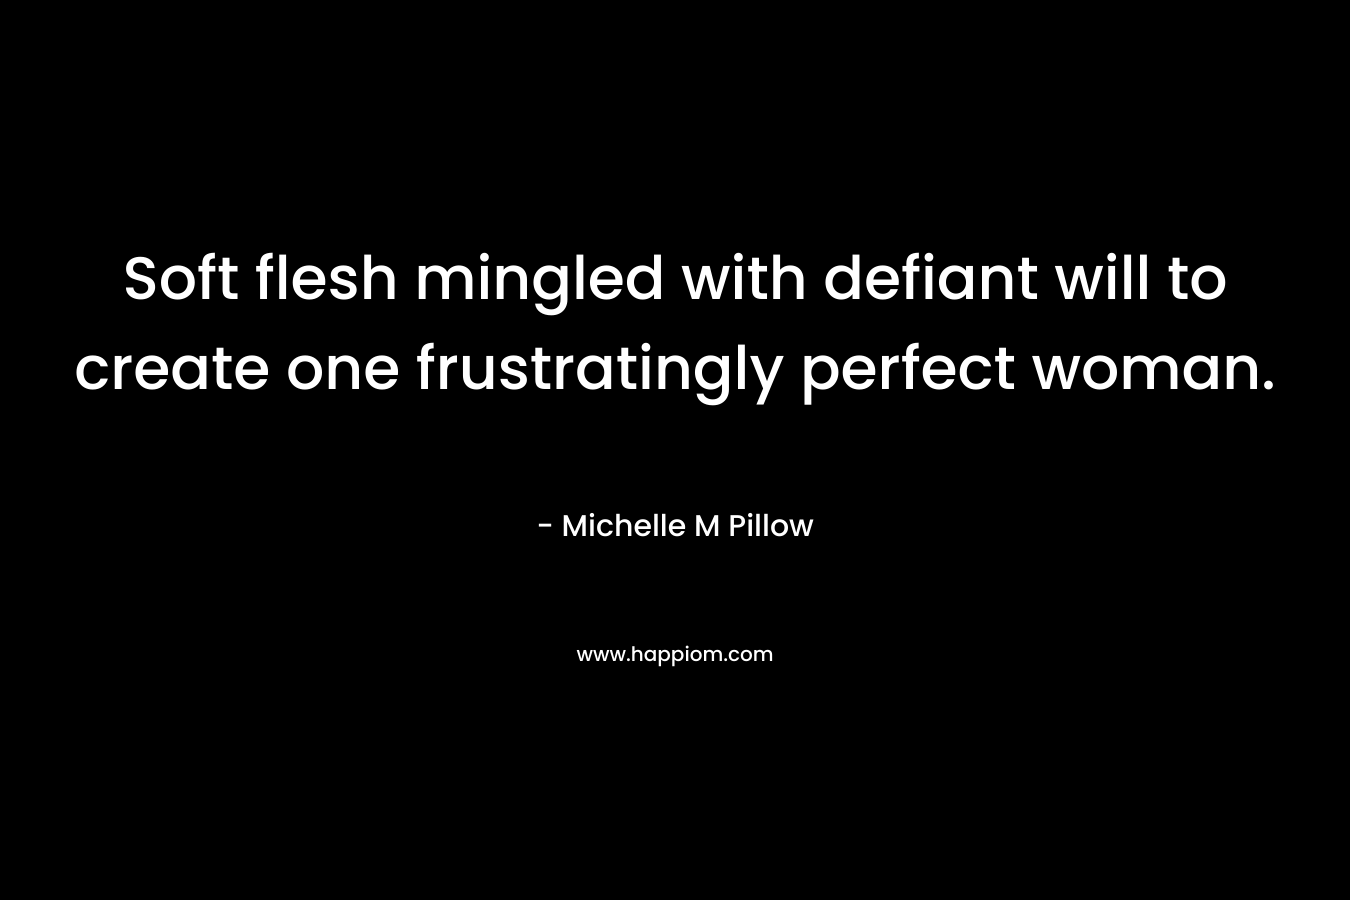 Soft flesh mingled with defiant will to create one frustratingly perfect woman.